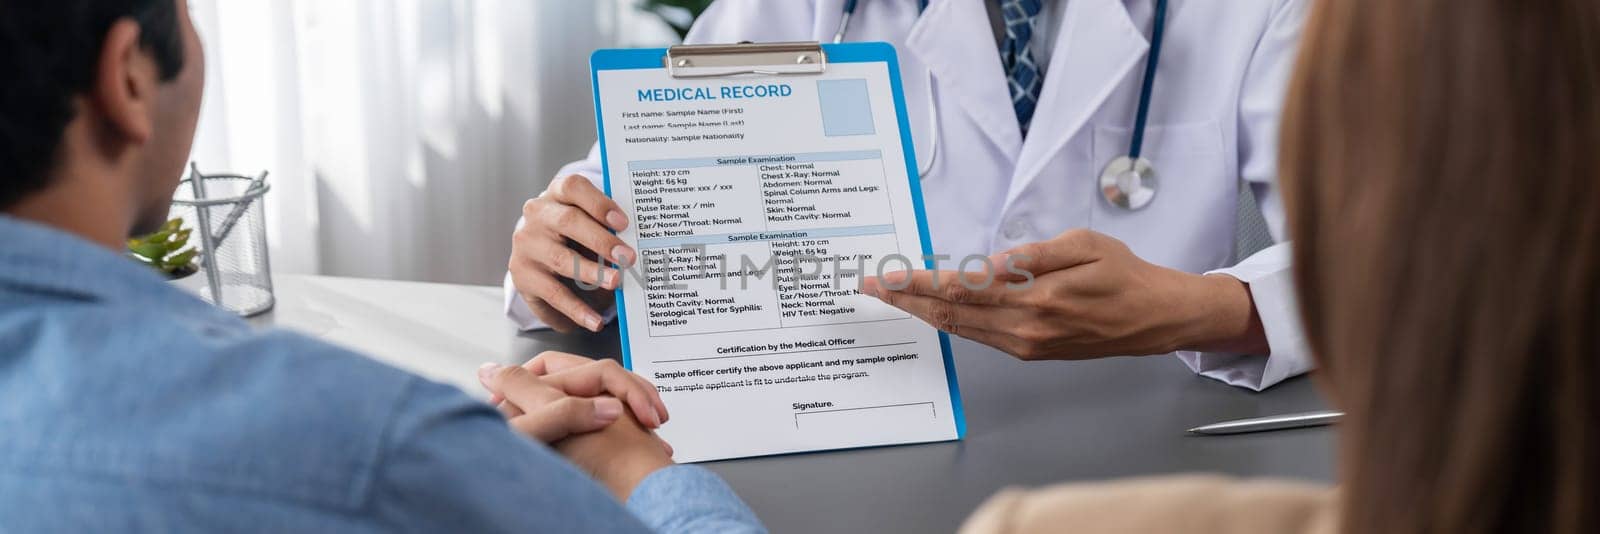 Doctor show medical diagnosis report and providing compassionate healthcare consultation to young couple patient in doctor clinic office. Doctor appointment and medical consult concept. Neoteric